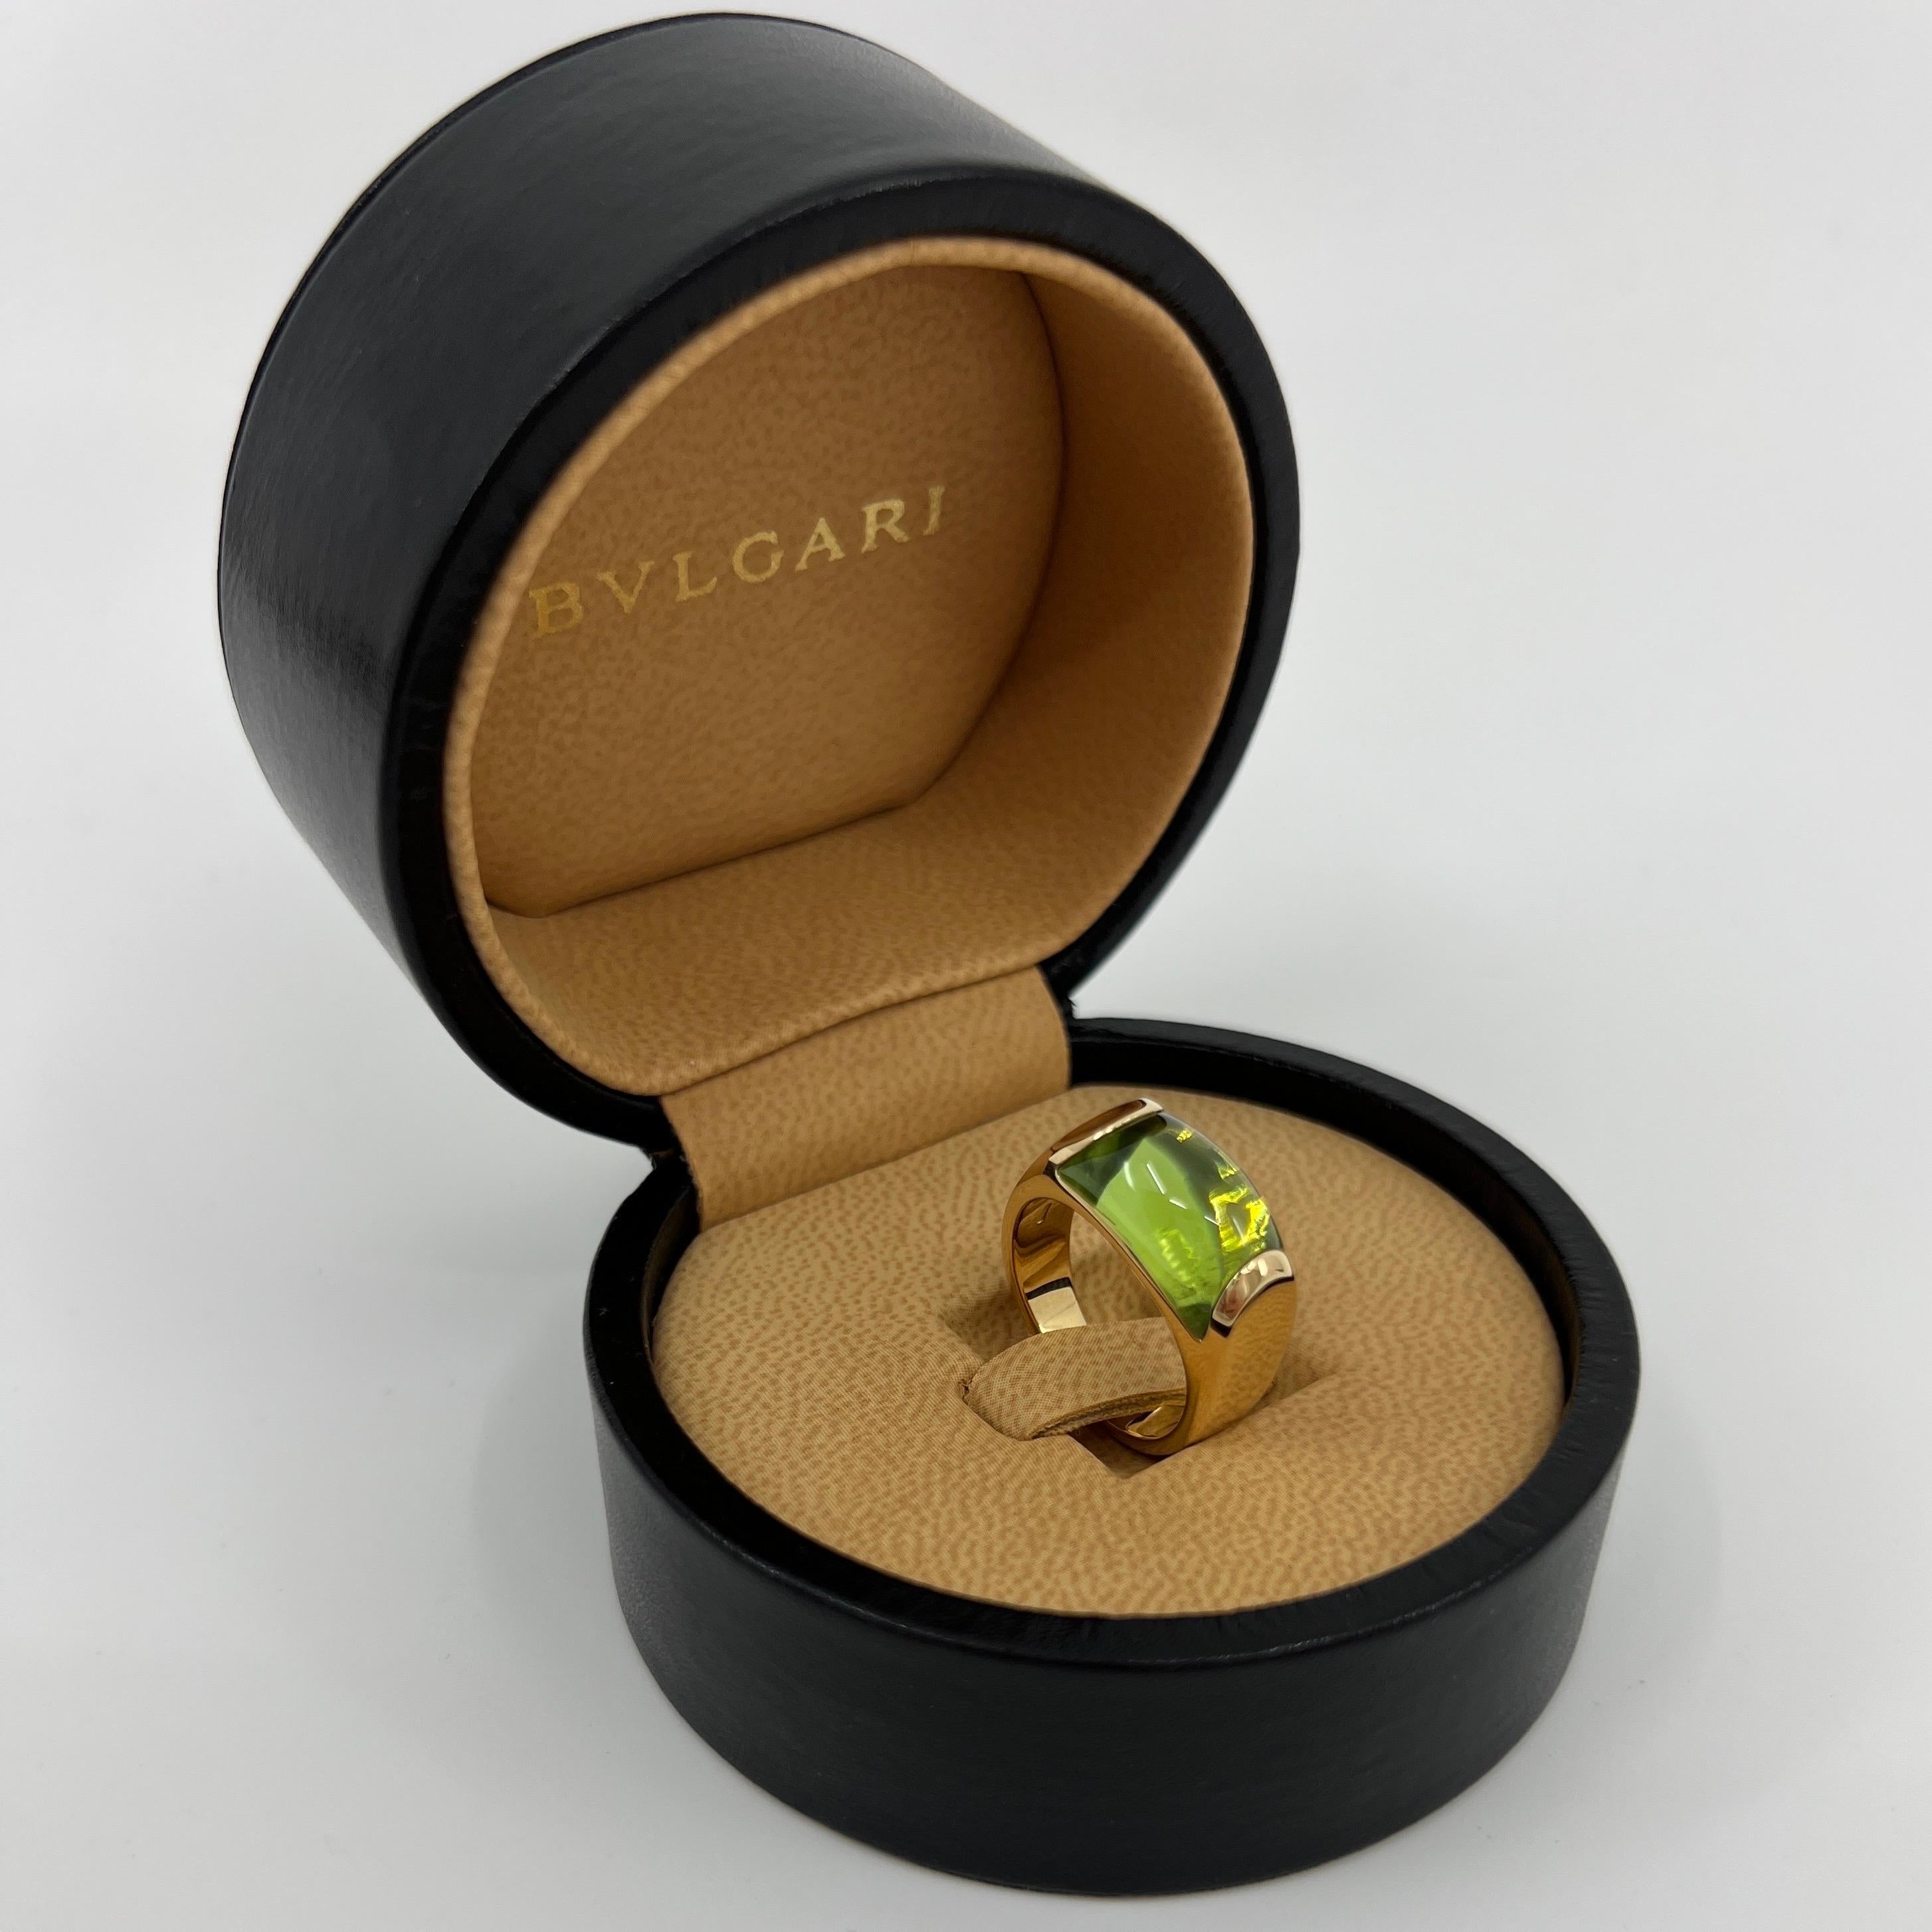 Rare Bvlgari Green Peridot Tronchetto 18k Yellow Gold Ring.

Beautiful domed green peridot set in a fine 18k yellow gold tension set ring.

In very condition, has been professionally polished and cleaned. Very small crack along one of the bottom